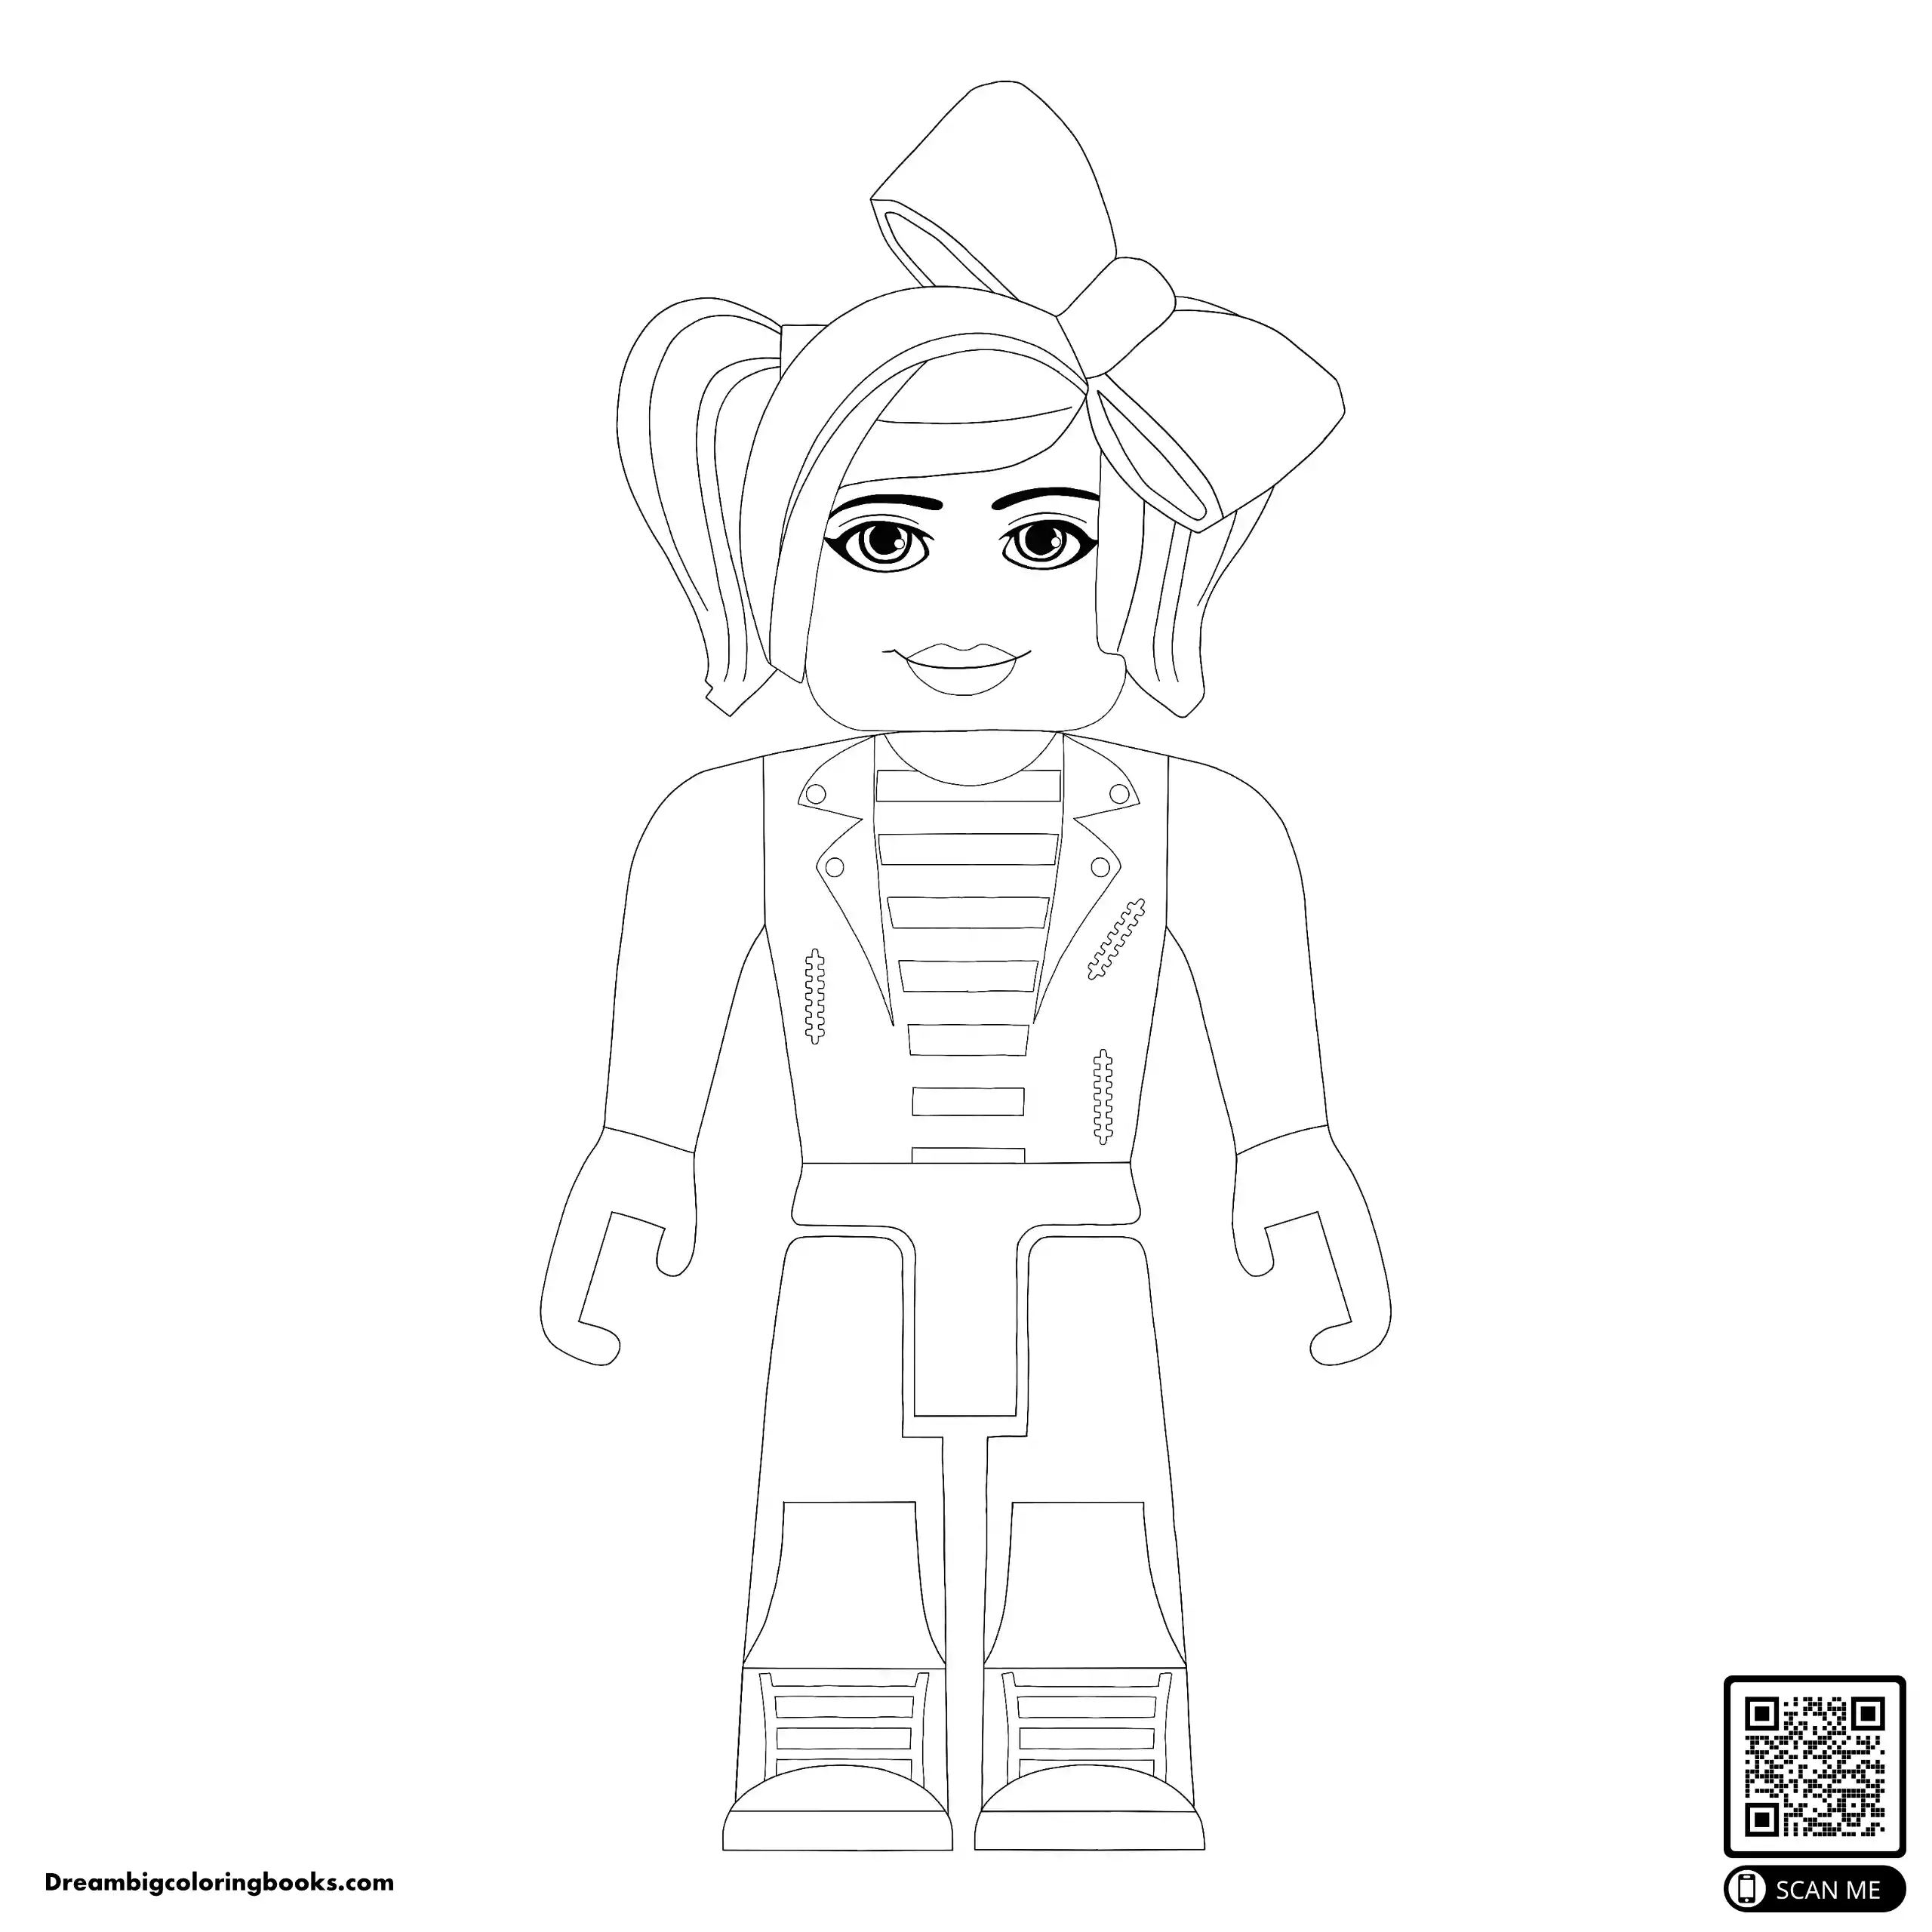 Roblox girl coloring page